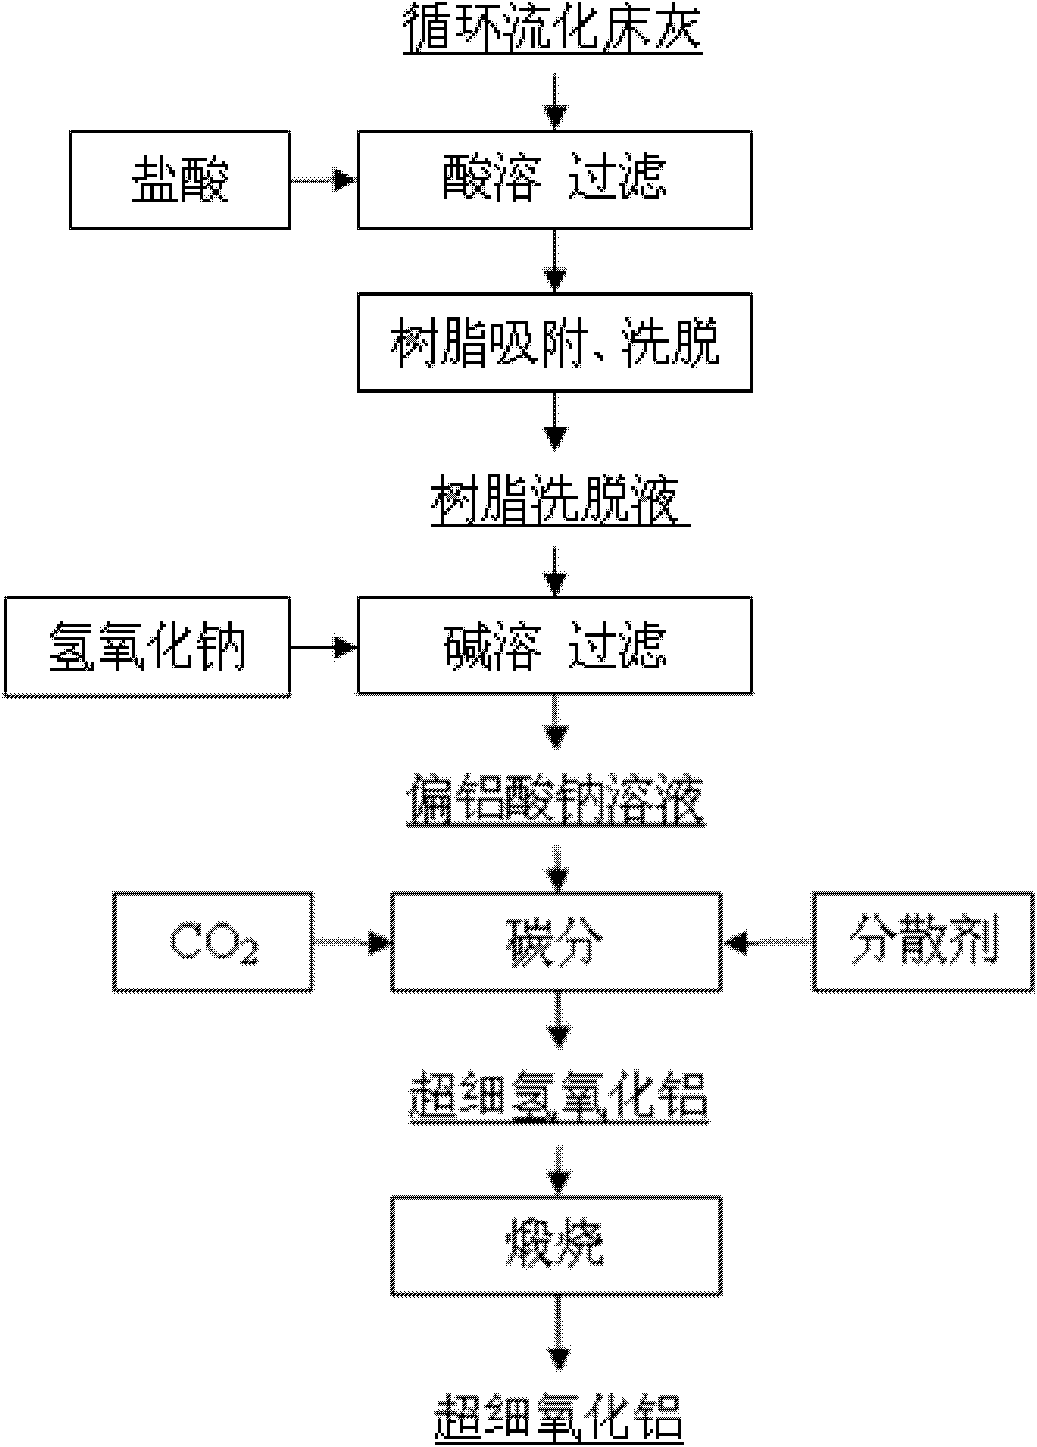 Method for preparing super-fine aluminum hydroxide and alumina from fly ash